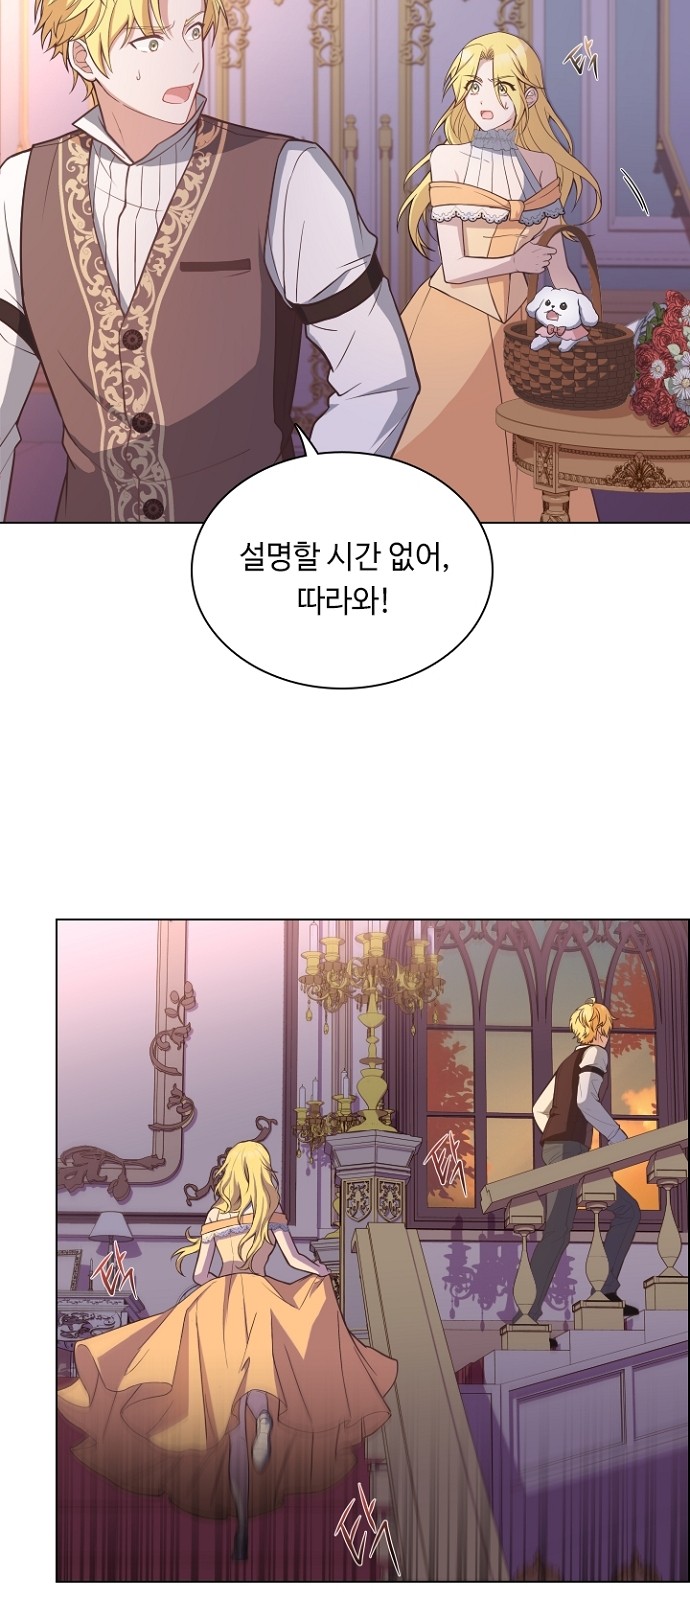 His Majesty's Proposal (A Night With the Emperor) - Chapter 33 - Page 4